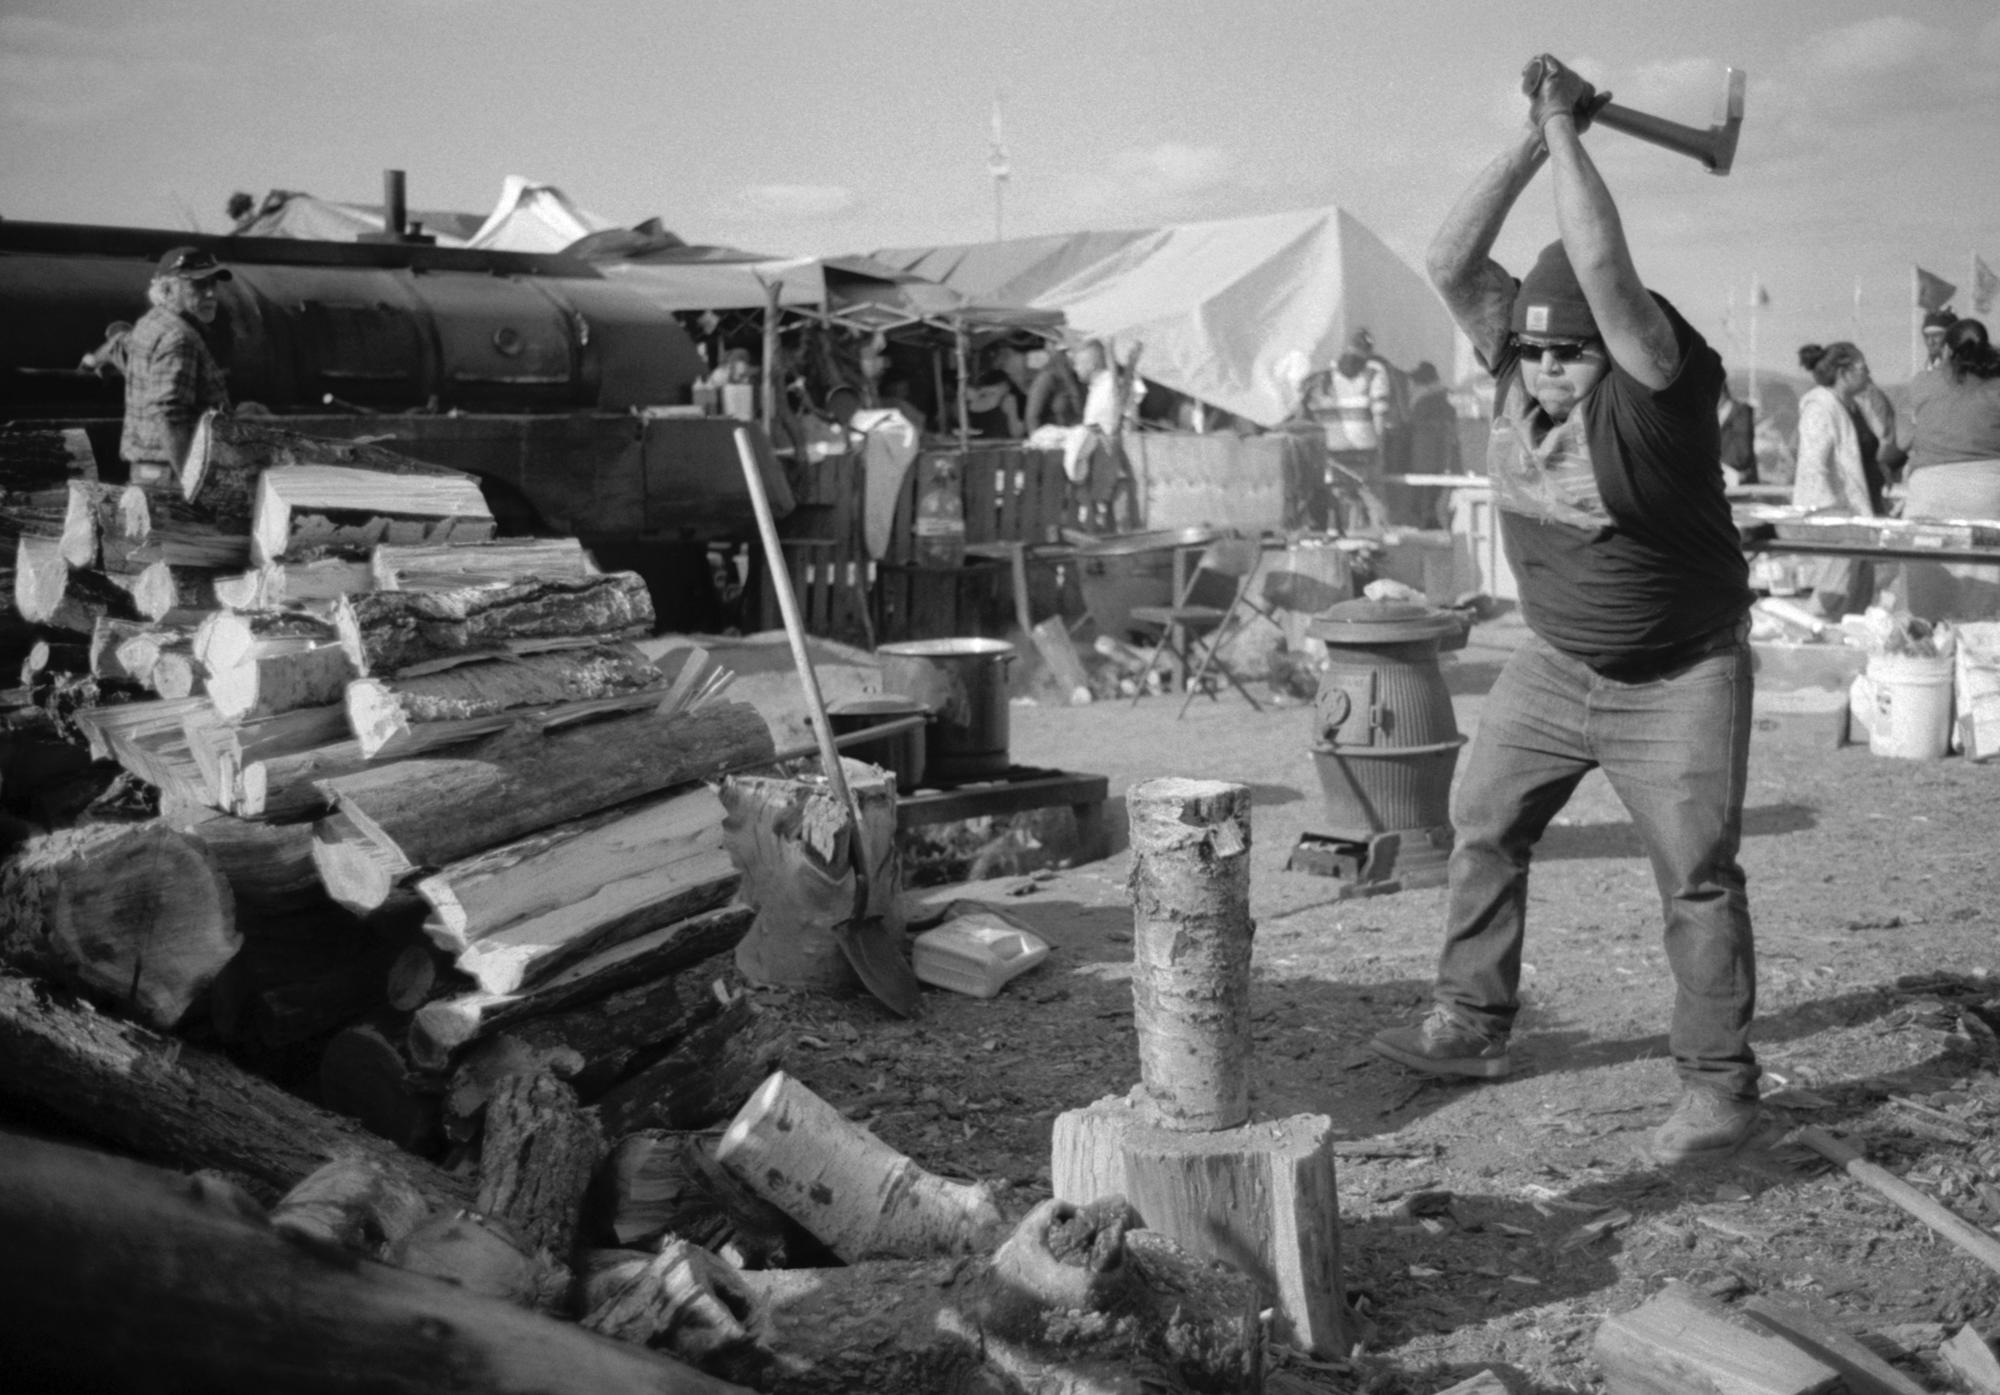 Standing Rock - Chopping wood near the main kitchen of the Oceti Sakowin...